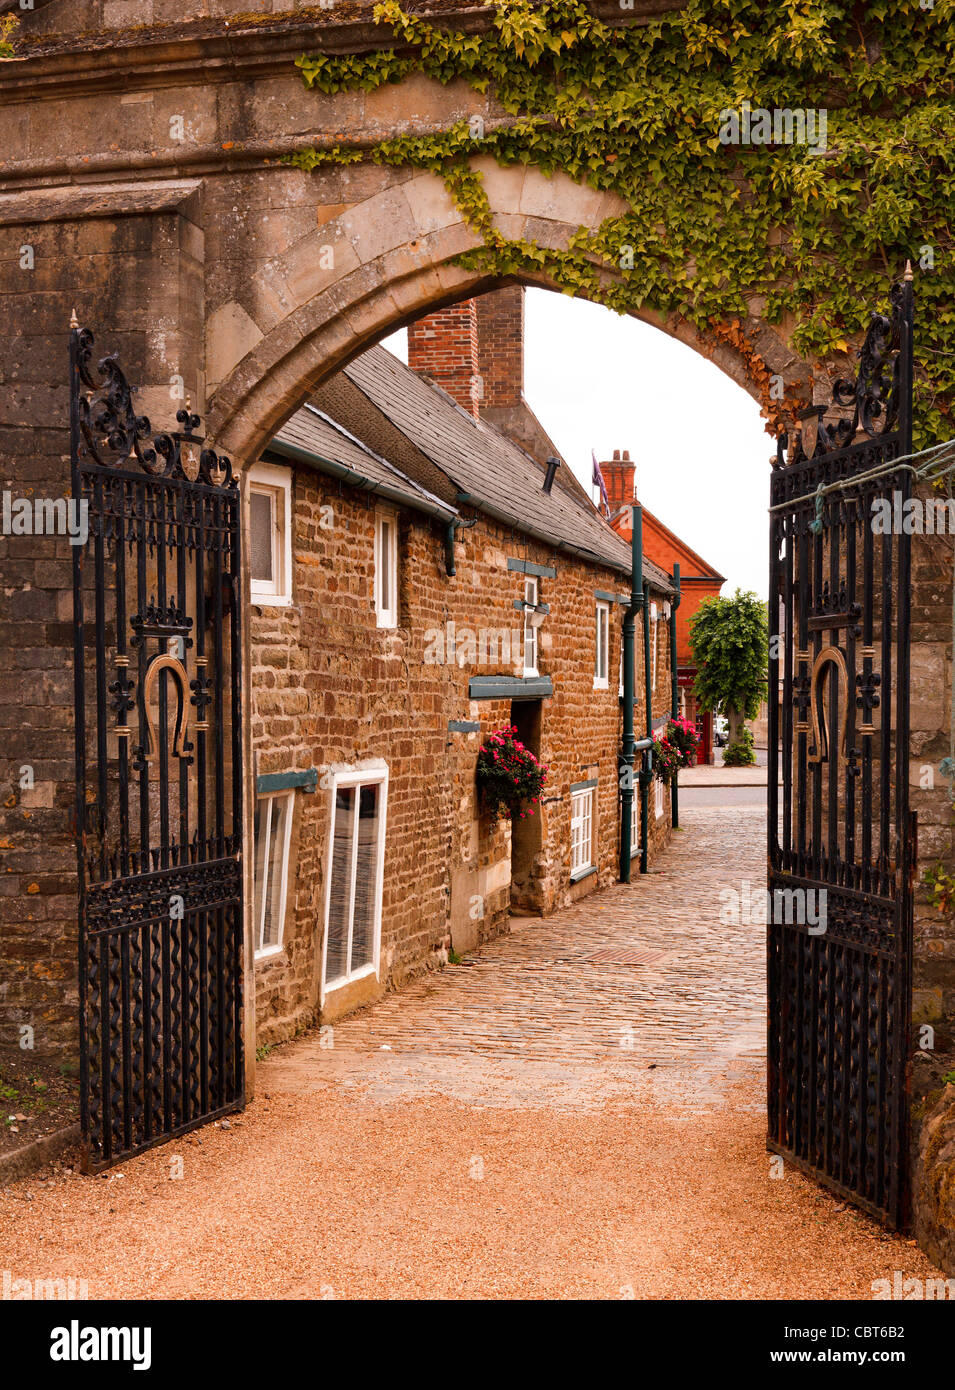 Stone arch and wrought iron gates at the entrance to the grounds of the Great Hall of Oakham Castle, Oakham, Rutland, England,UK Stock Photo